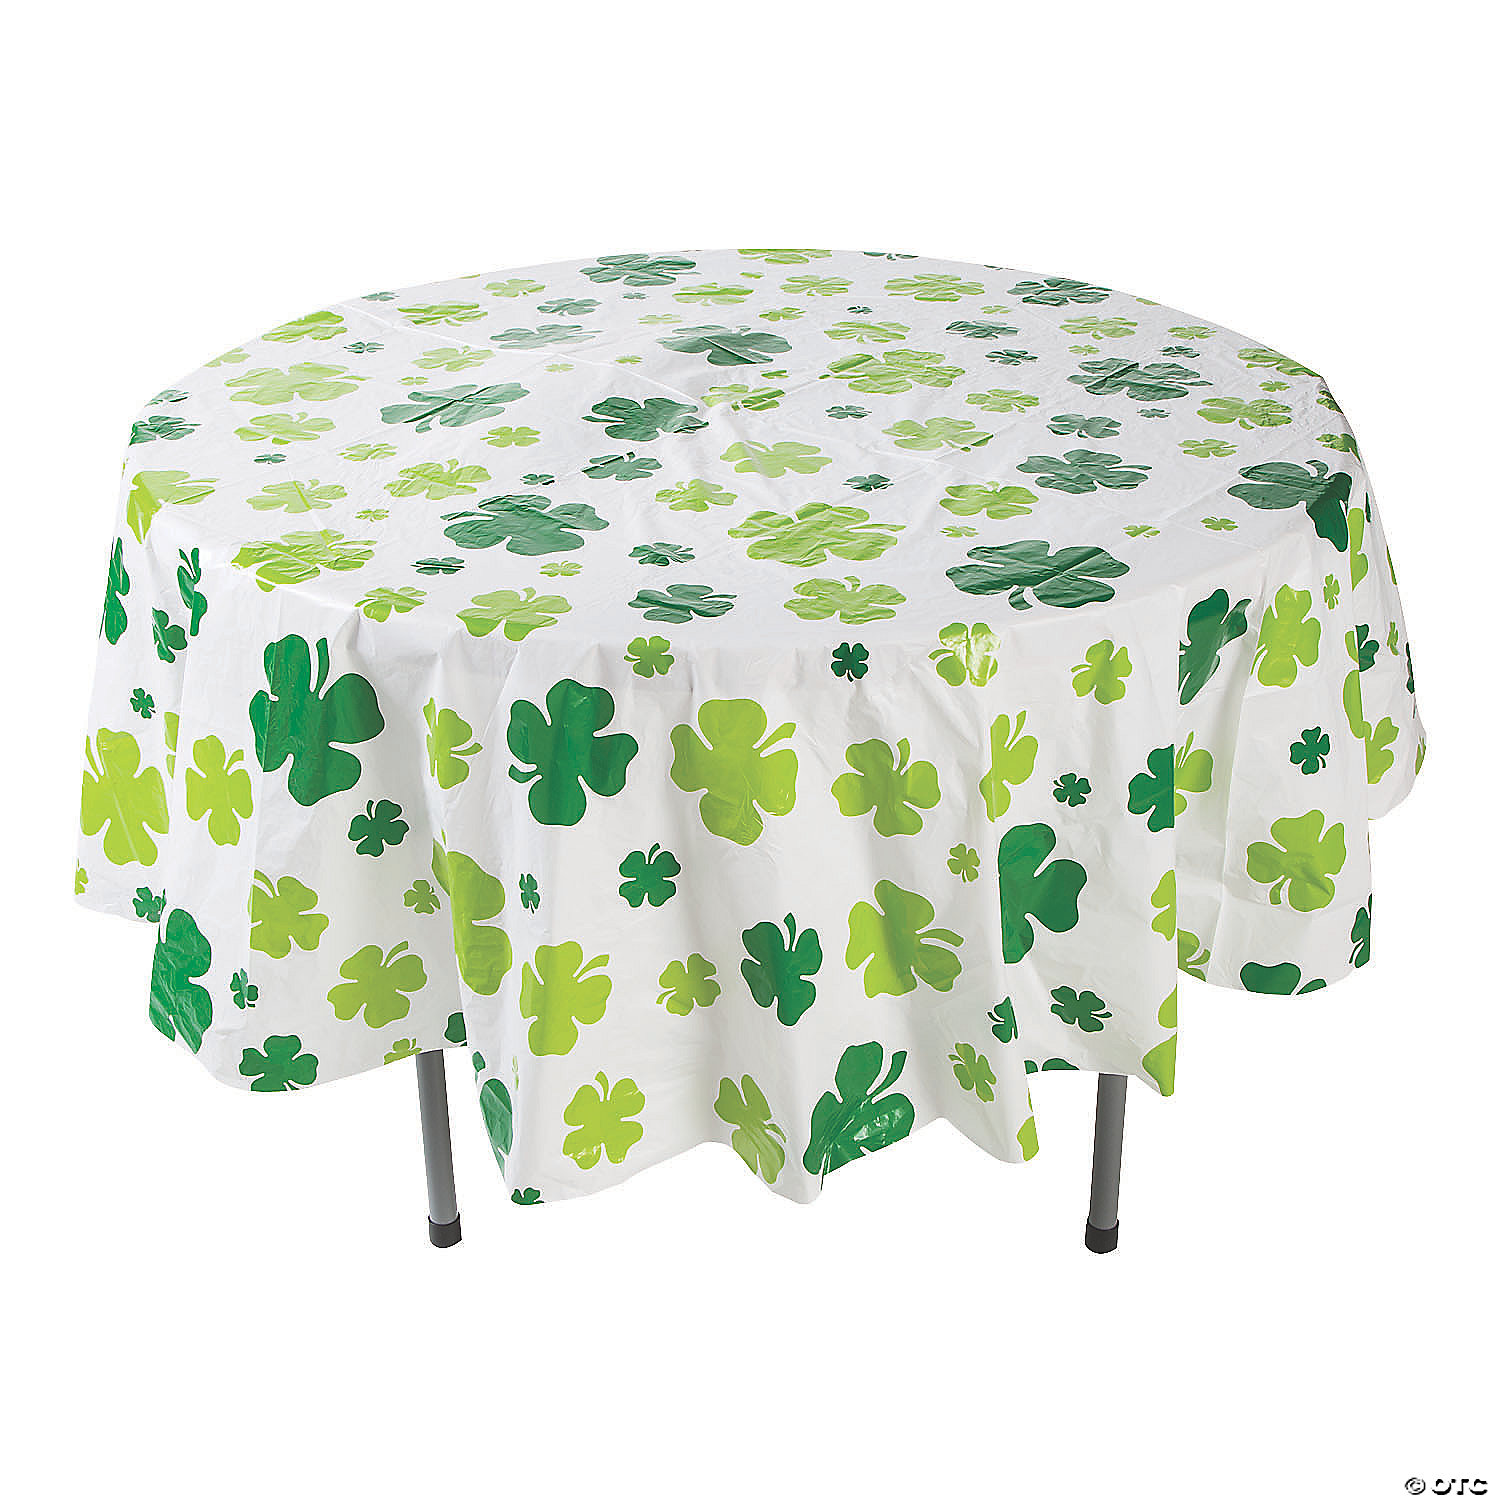 ST PATRICK'S DAY CLOVER PLASTIC TABLE COVER ~ Party Supplies Decorations Green